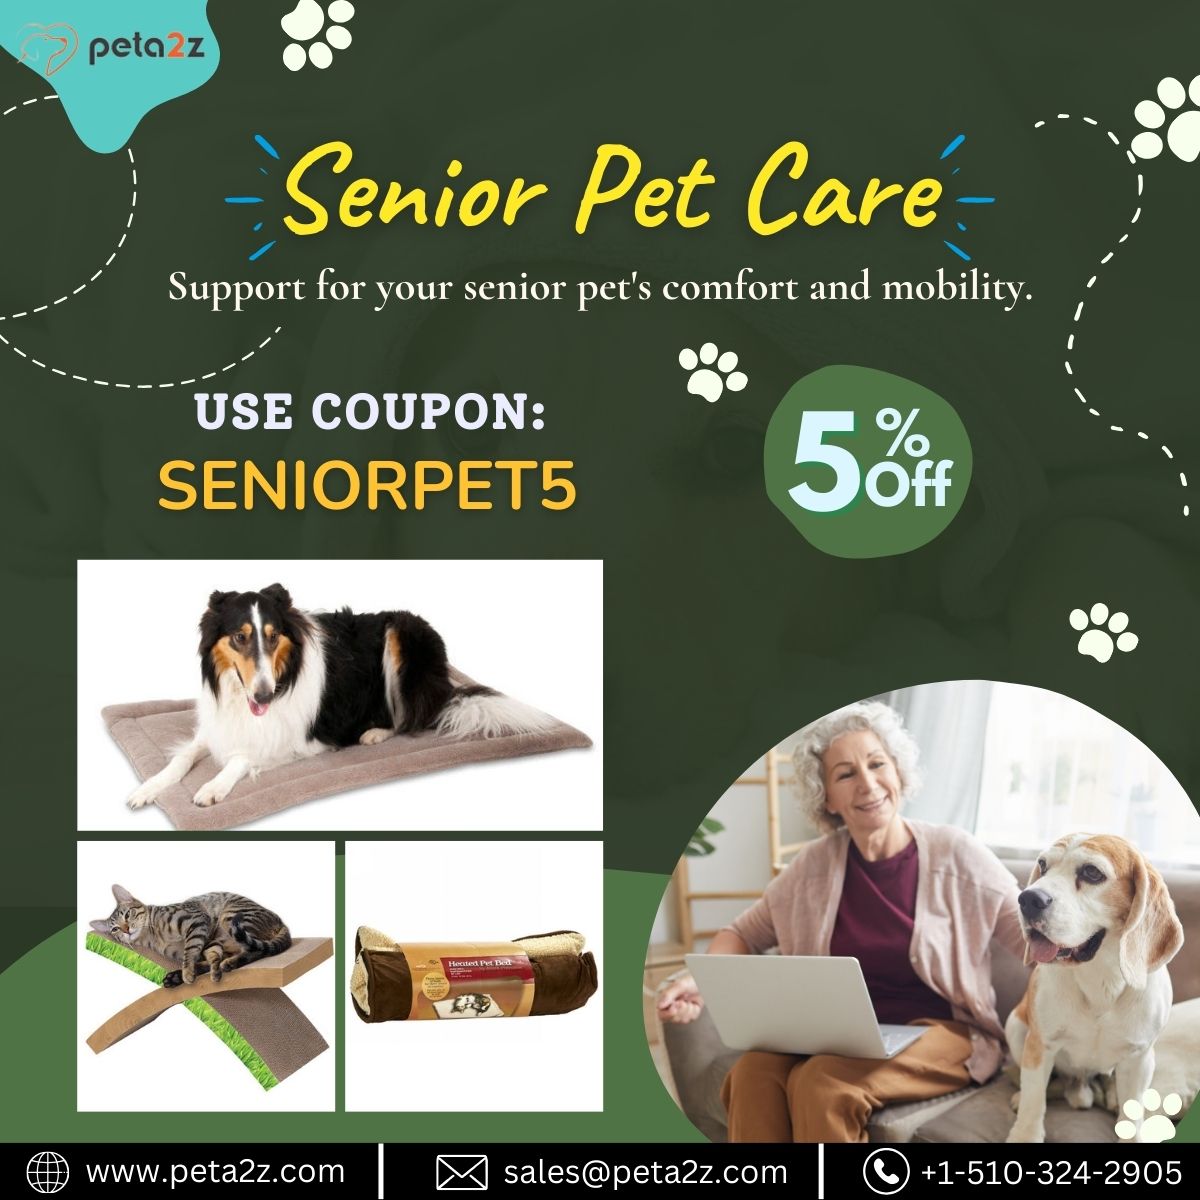 🐾Senior Pet Care! As our furry friends age, they deserve extra love. Our specially formulated products cater to the unique needs of senior pets, promoting joint health and overall vitality. #SeniorPetCare #PetWellness #LoveYourSeniorPet 🐾
bityl.co/Po3v